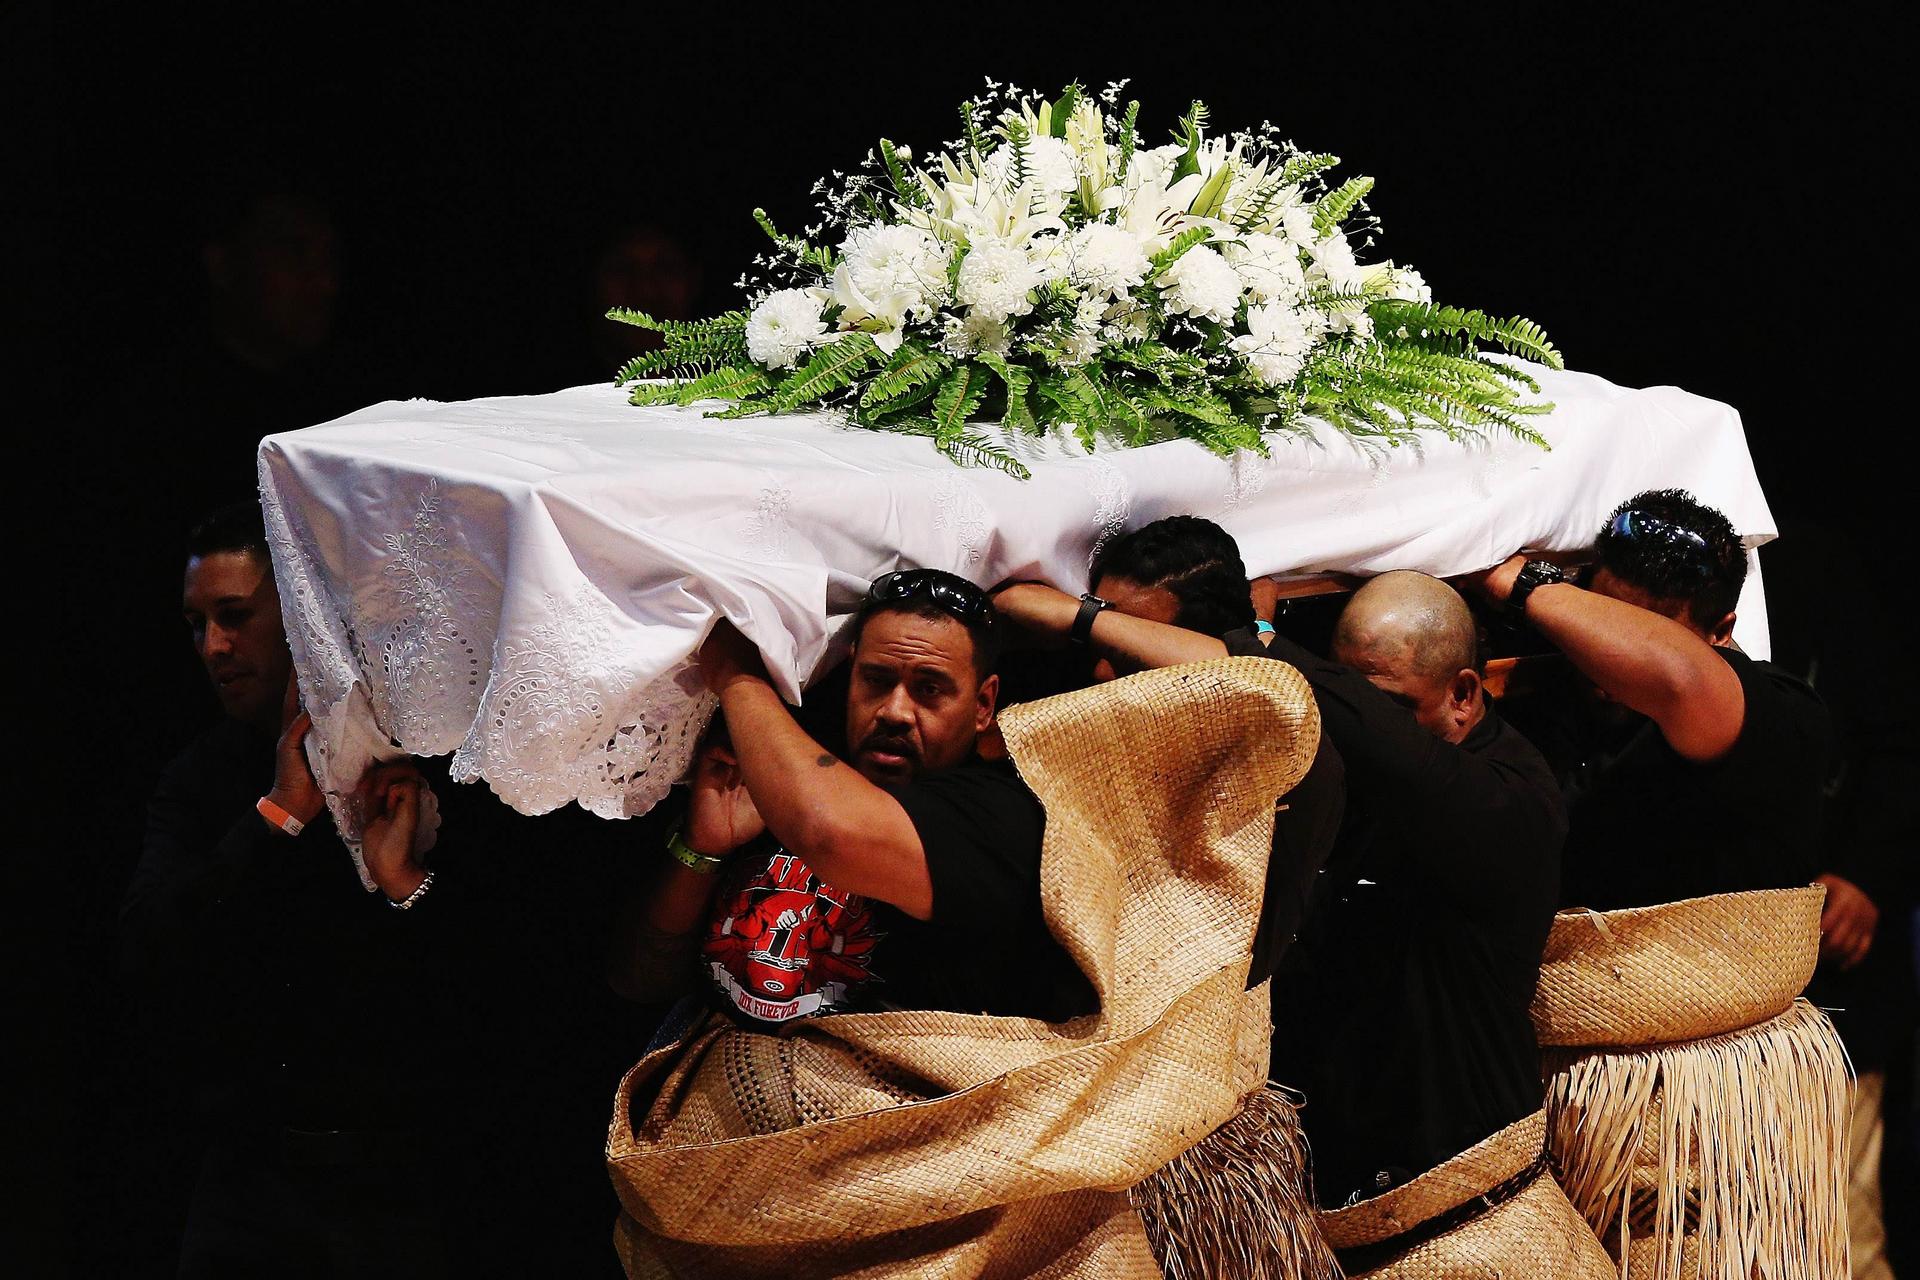 The casket containing Jonah Lomu is carried out. Photos: AFP